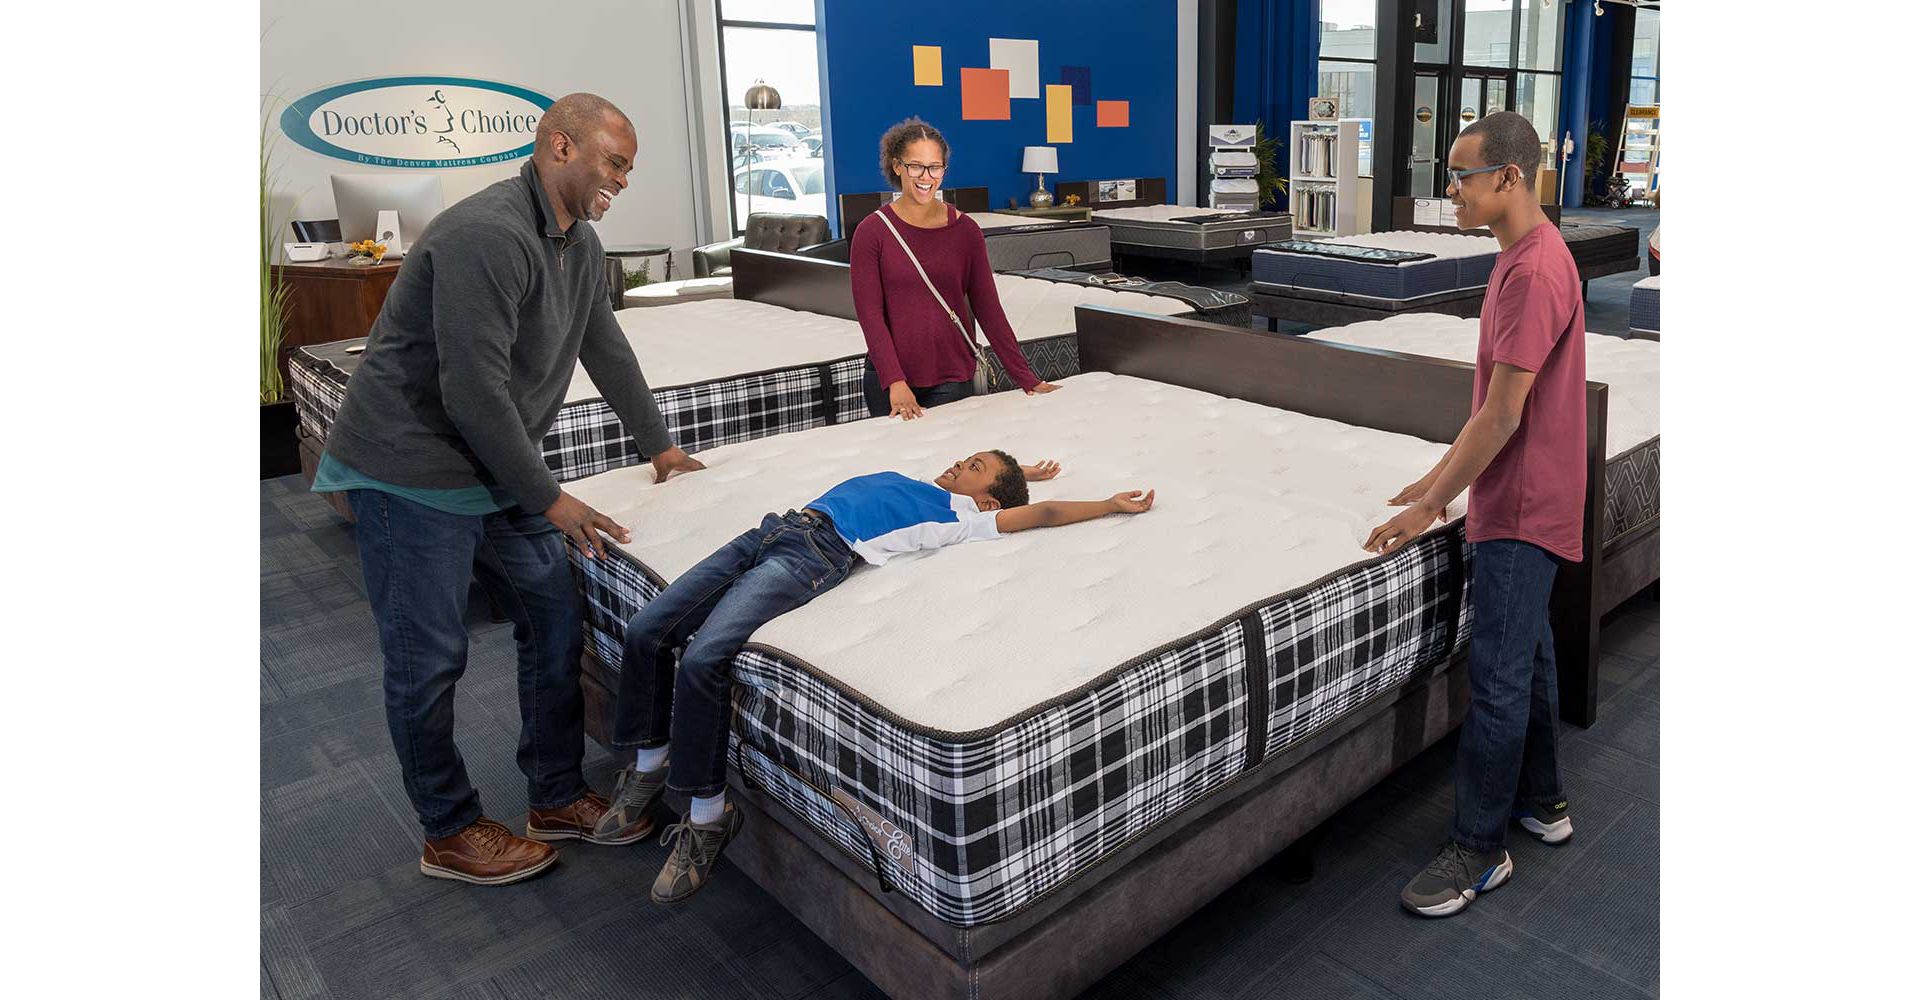 family of 4 browsing a doctor's choice elite mattress